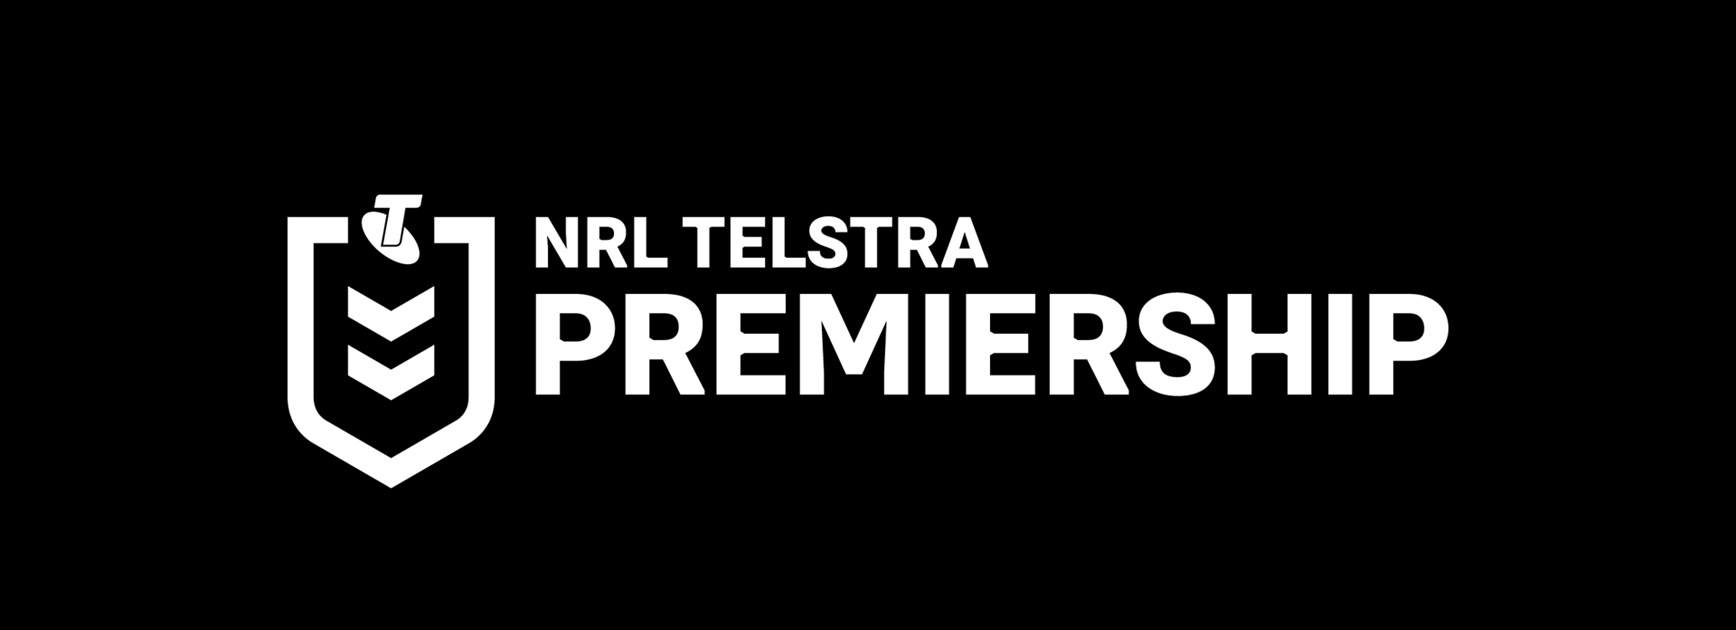 2019 NRL rosters: Official squads announced for all teams